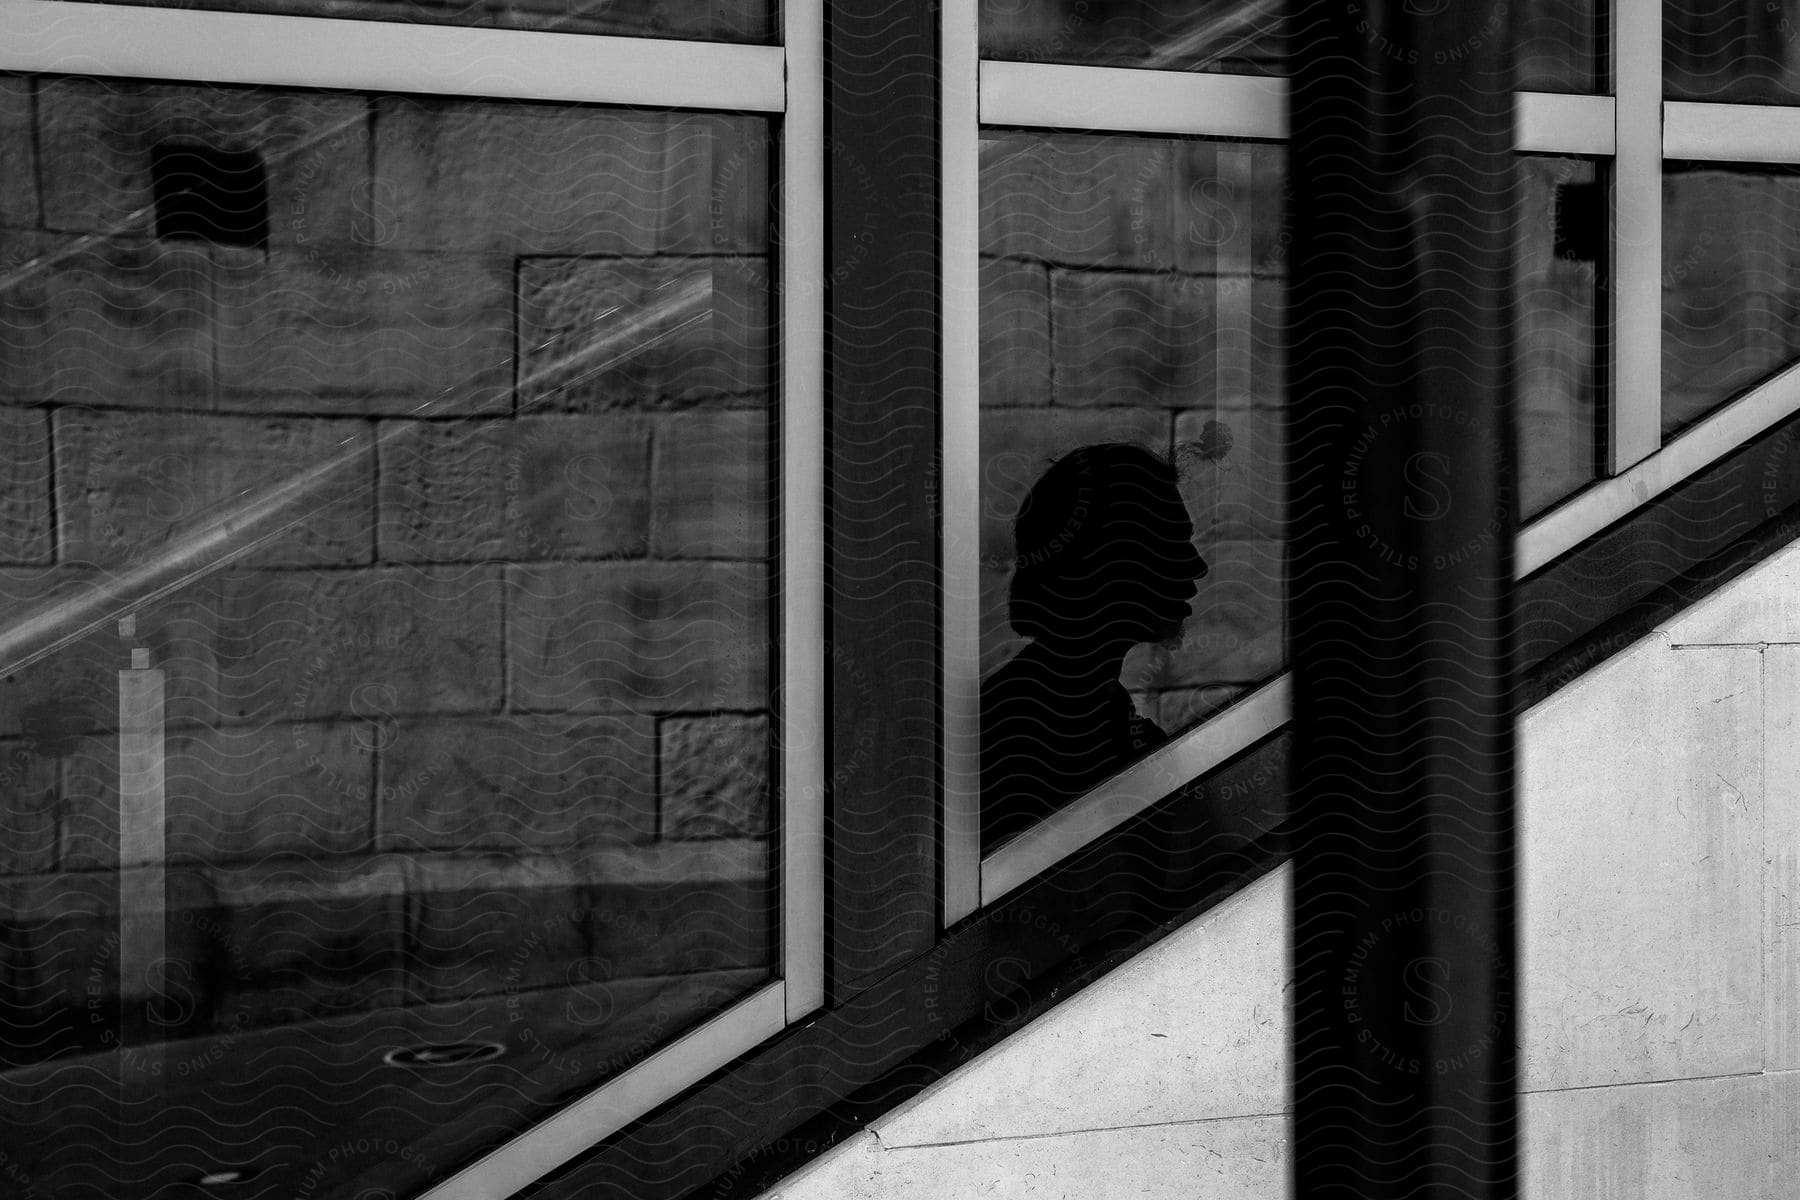 Silhouette of a person's head seen through a window as they walk inside a building